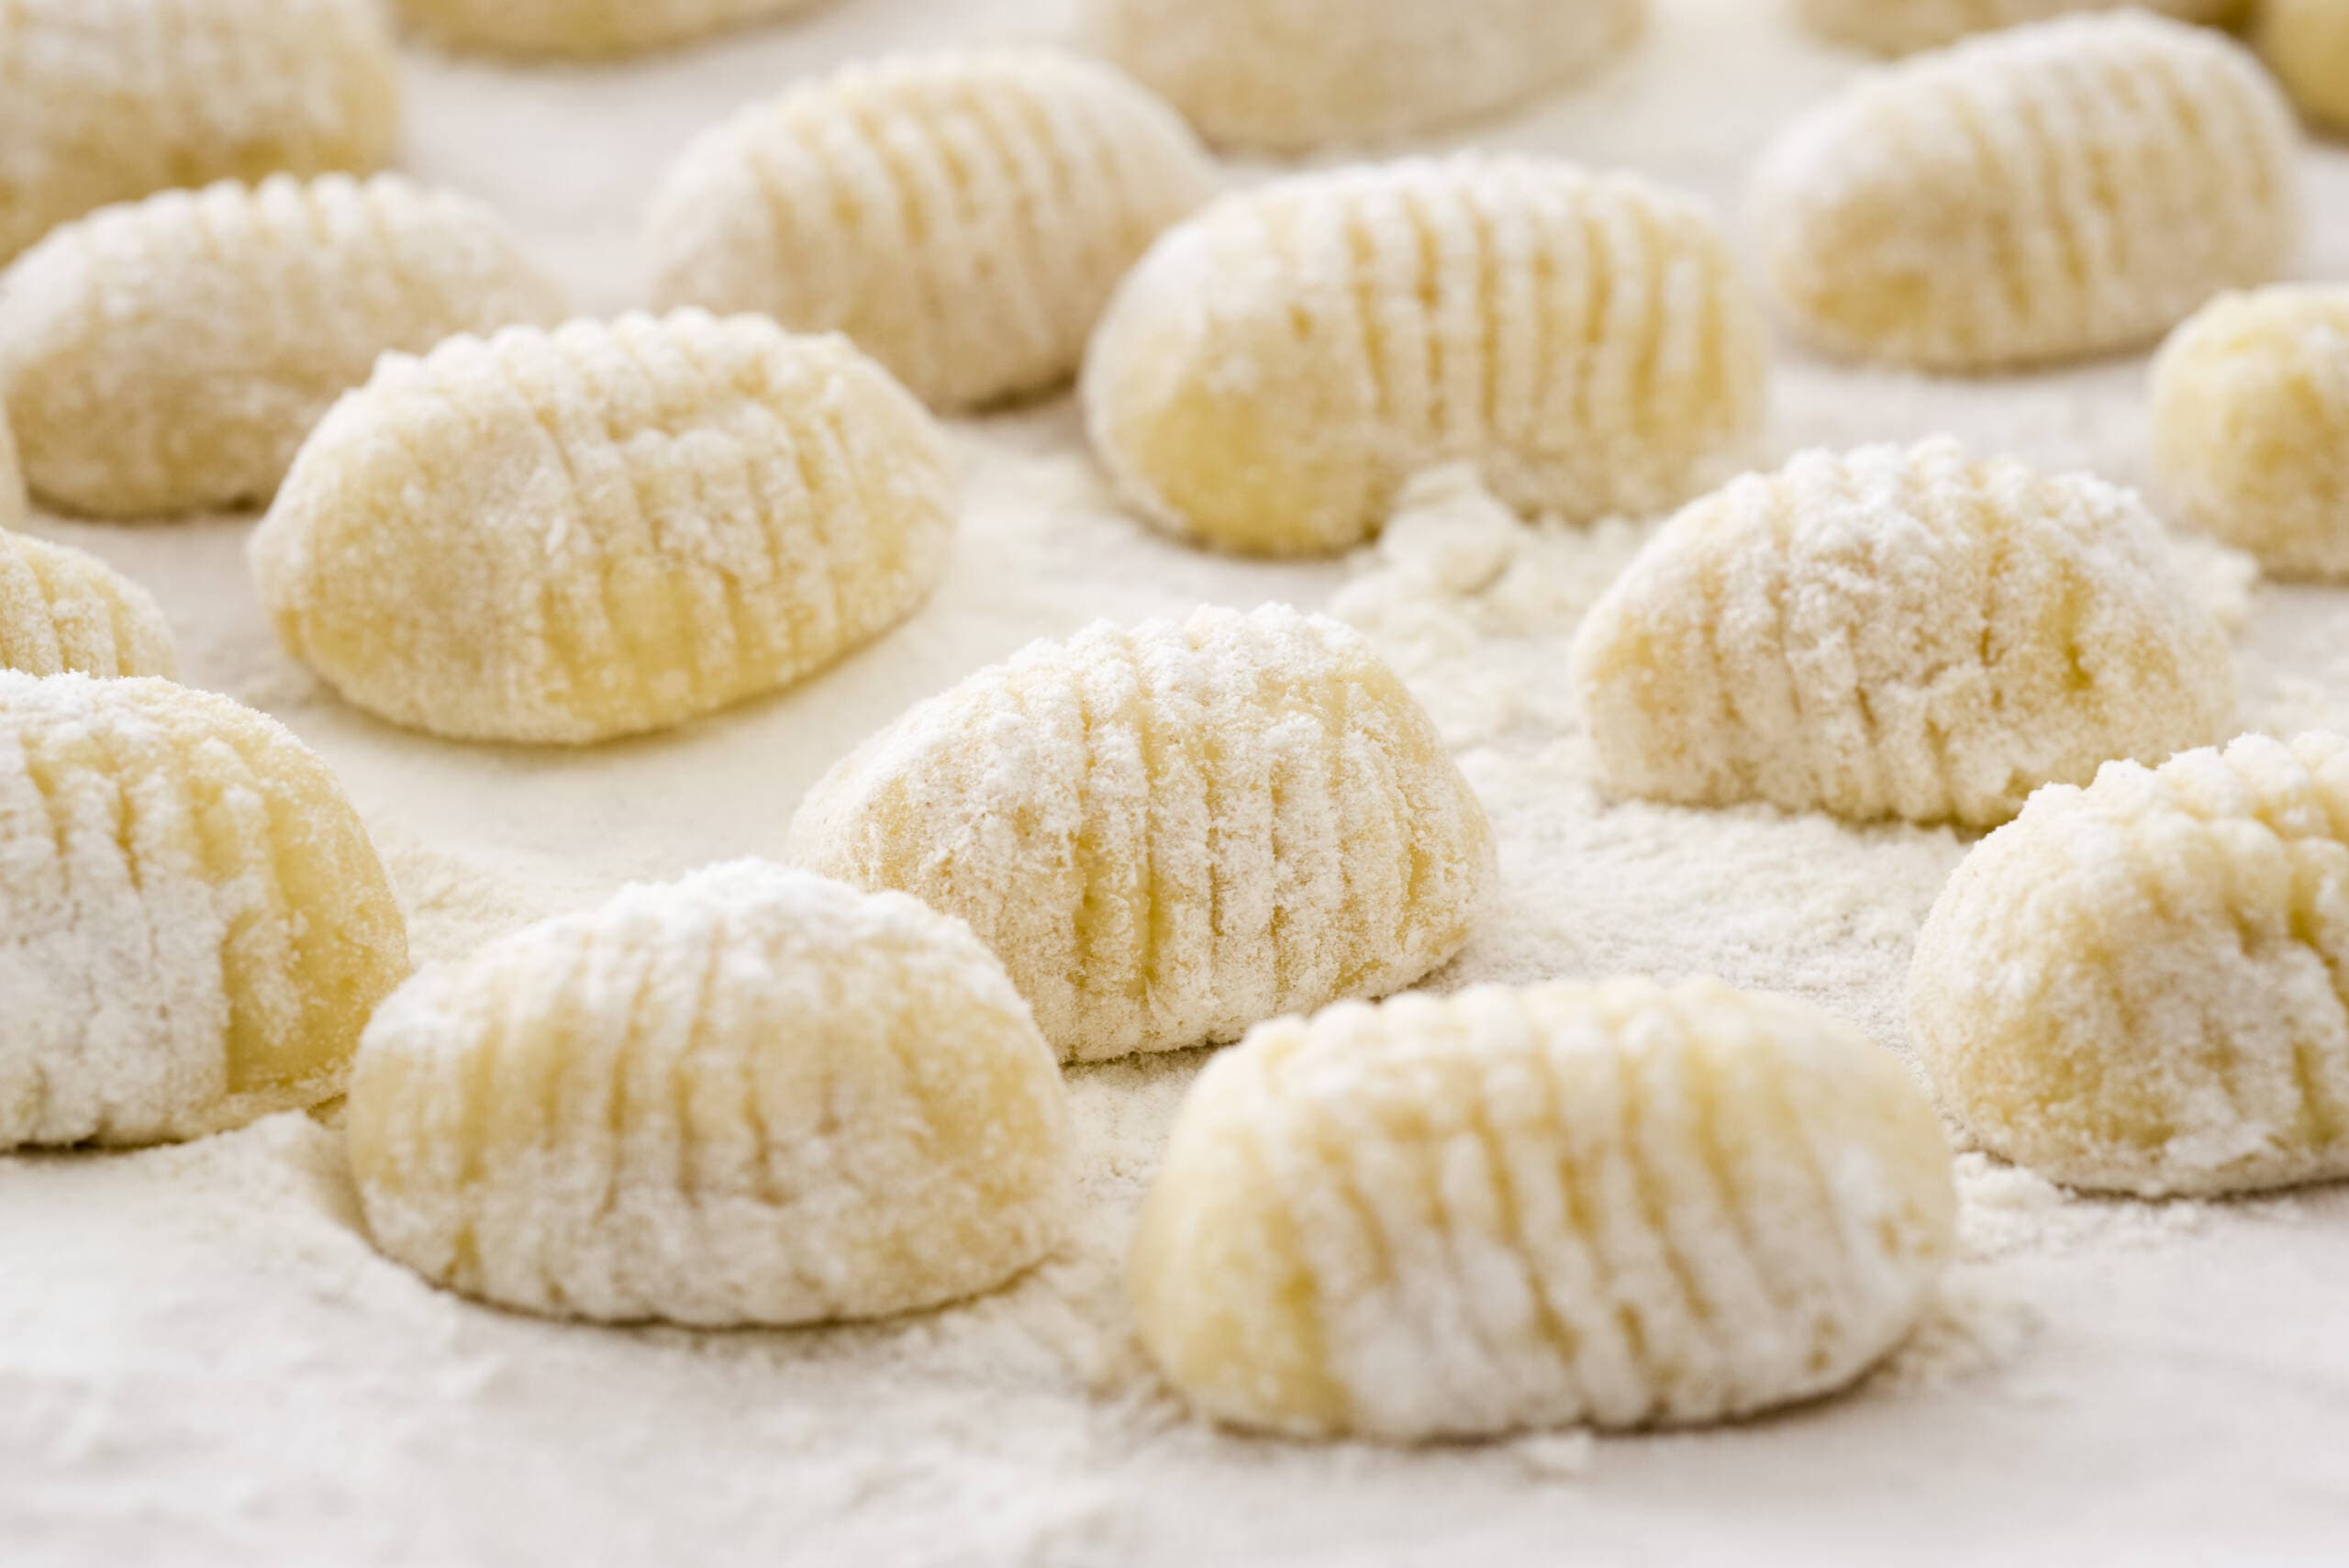 Fresh homemade gnocci. (PhotoAlto/Laurence Mouton via GettyImages)